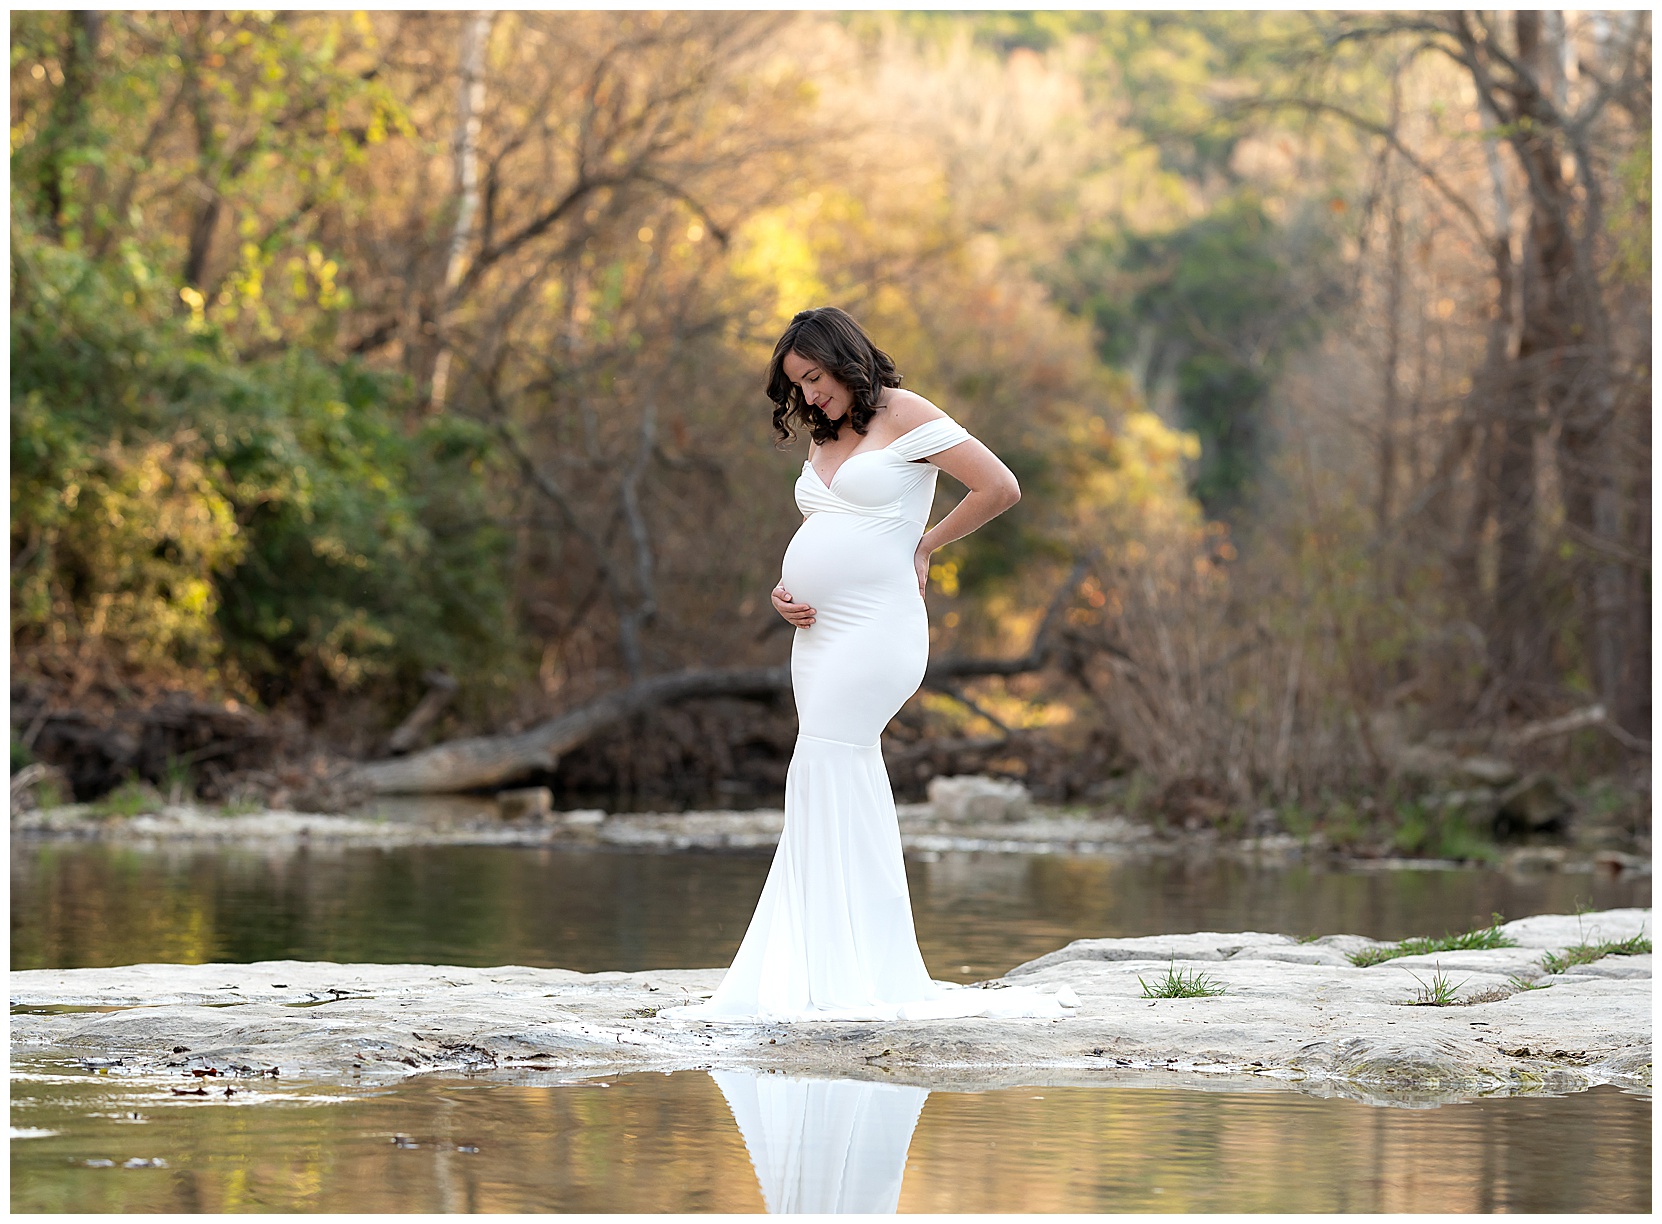 Maternity Photo Shoot in Studio or Outdoors: How To Decide